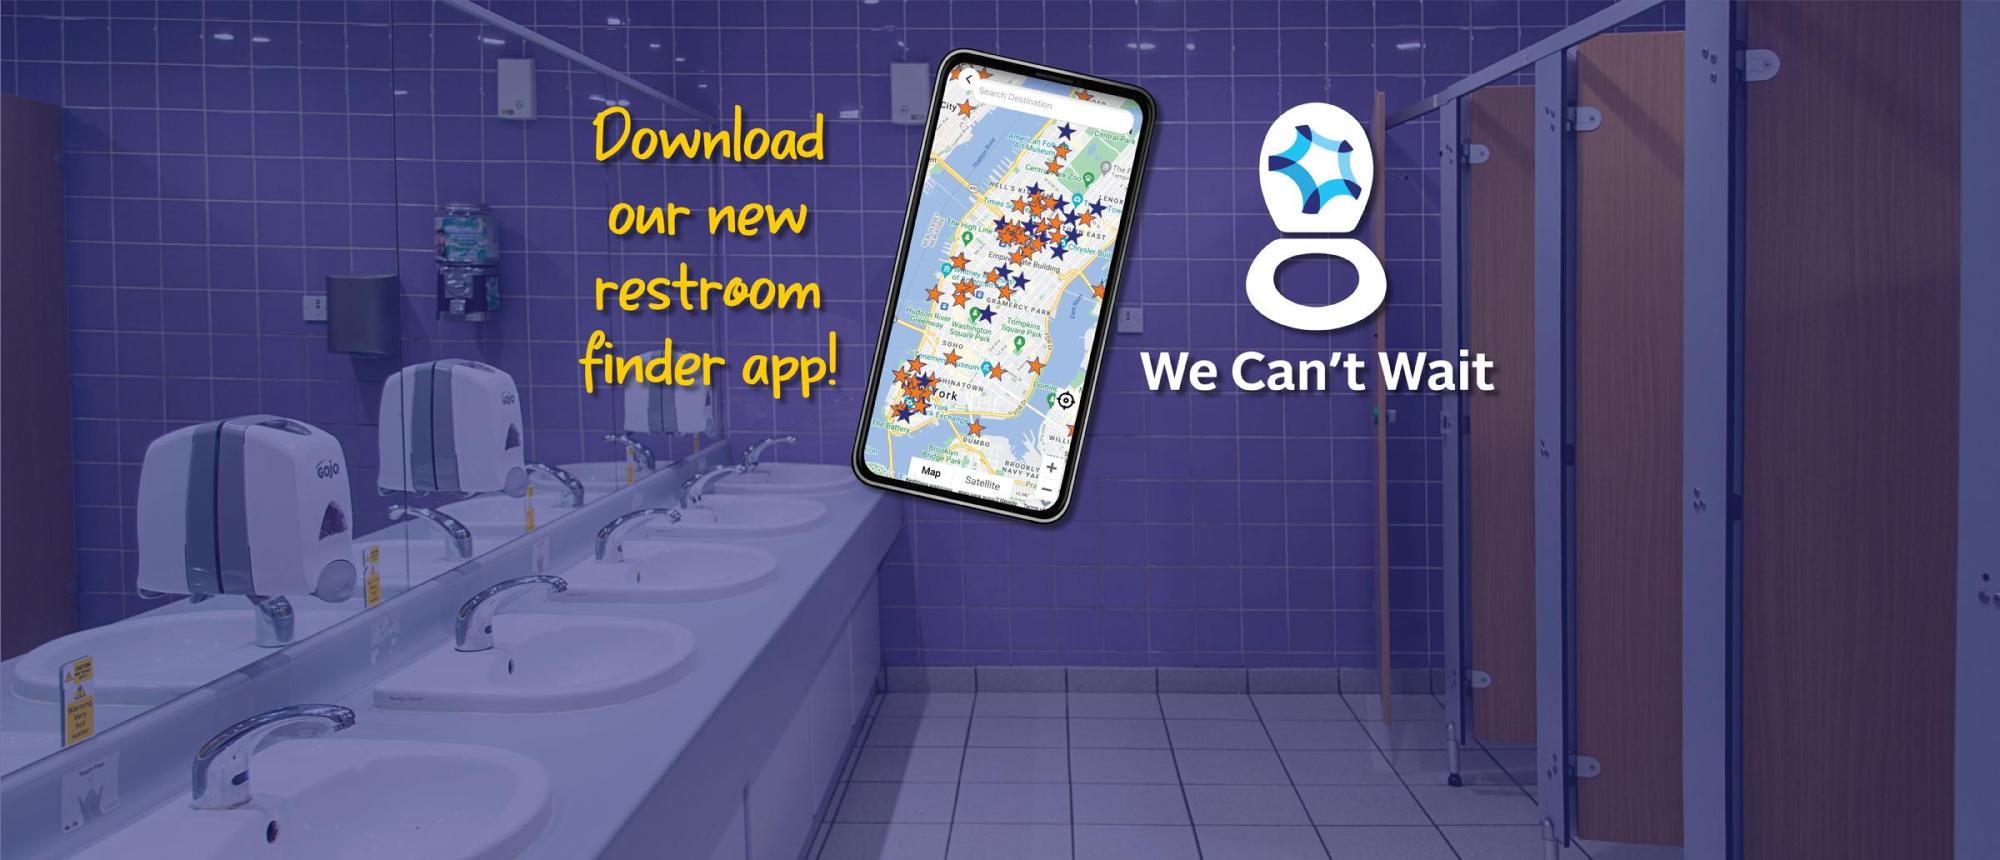 restroom app home page new